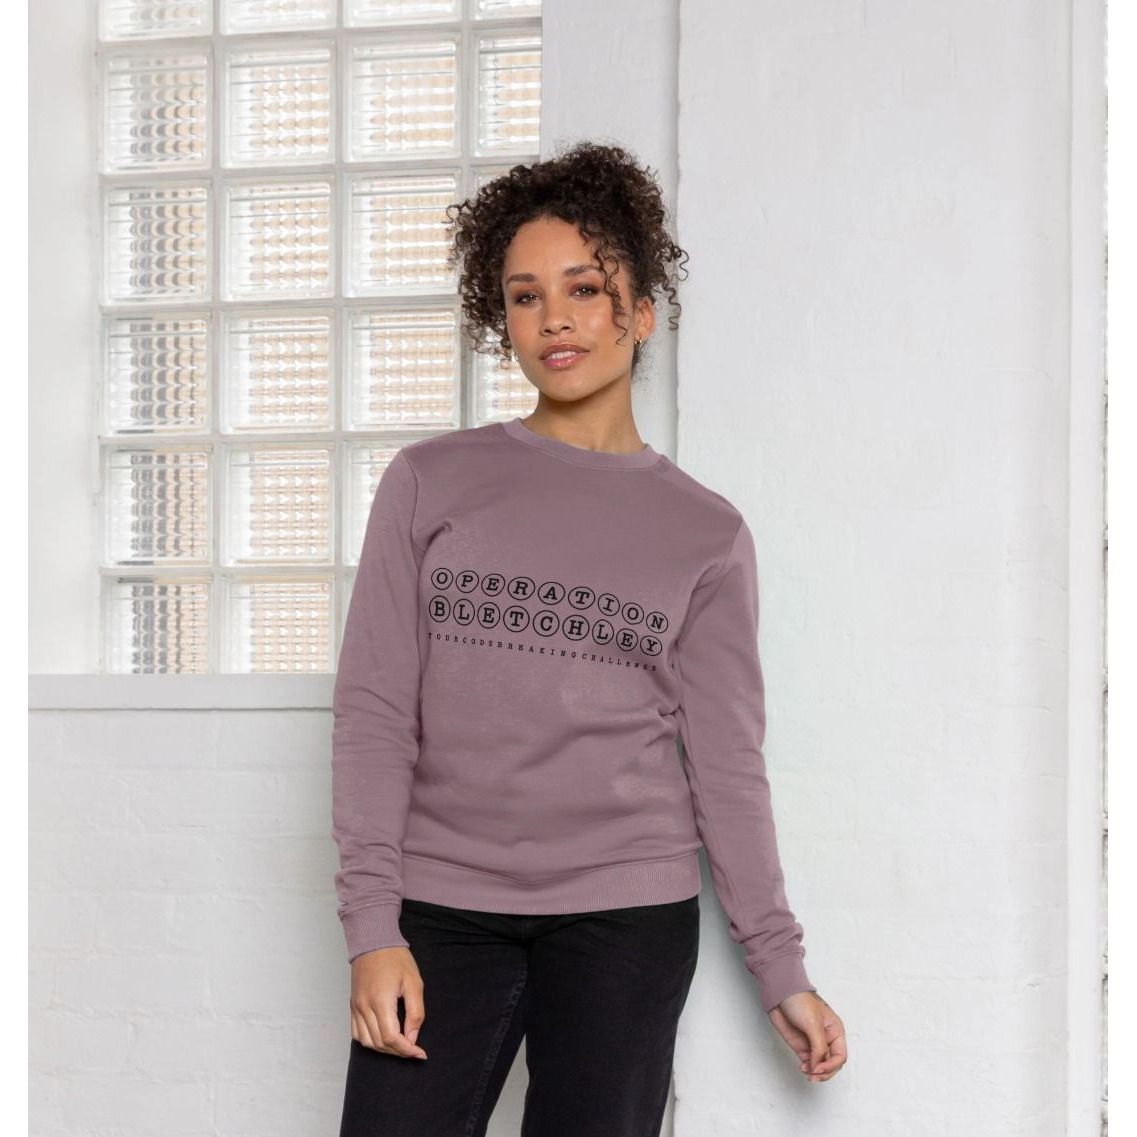 Operation Bletchley women's sweater - ABF The Soldiers' Charity Shop